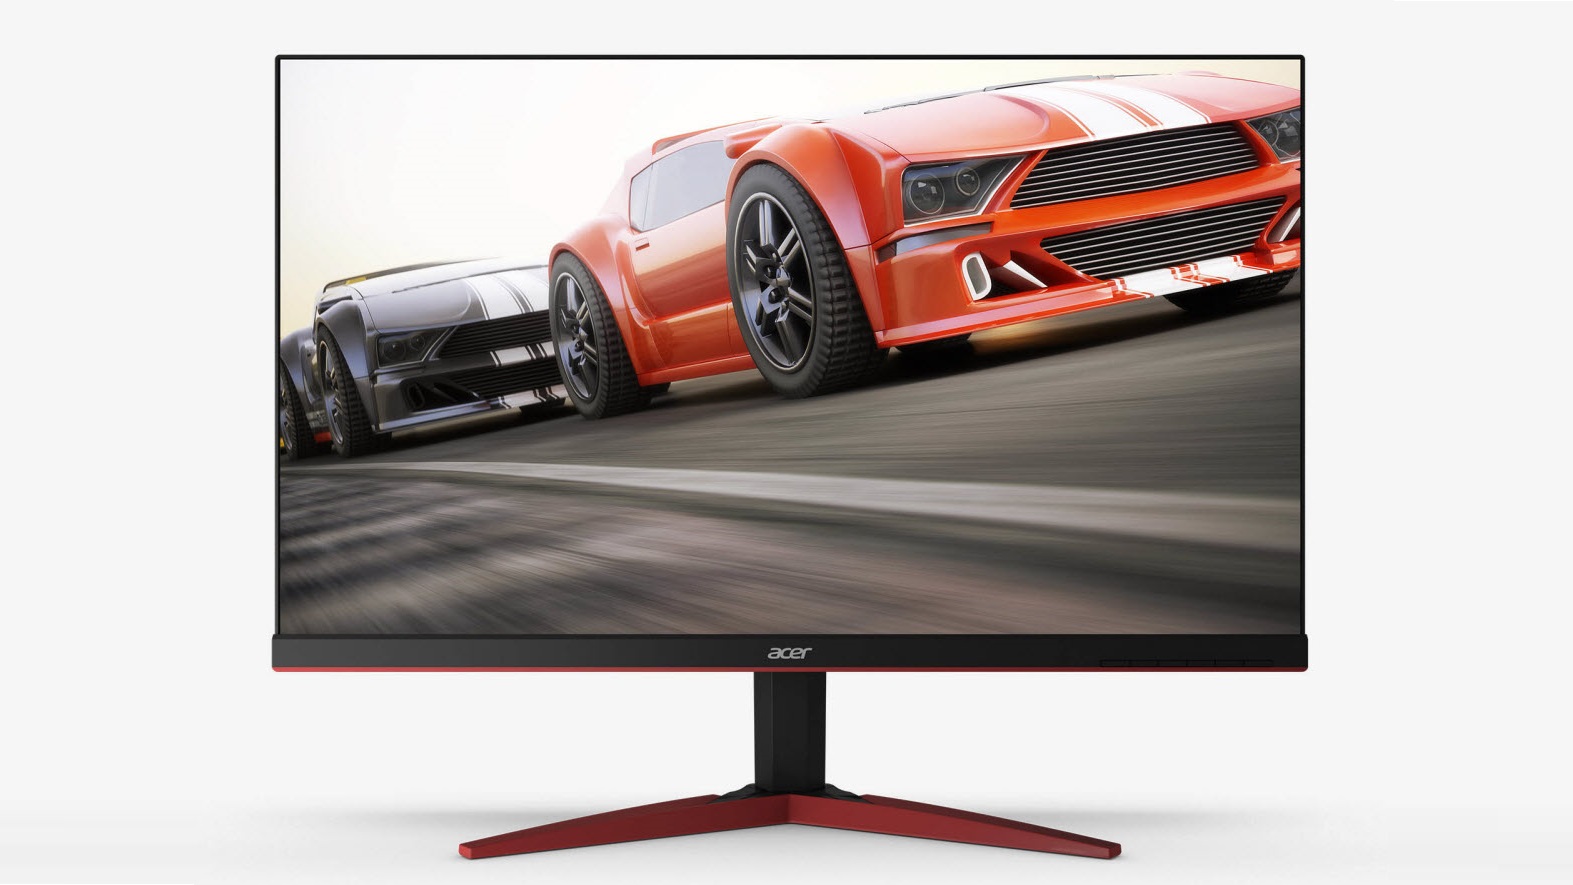 Go 1440p With Acer's 27-inch Monitor for Just $210 | Tom's Hardware